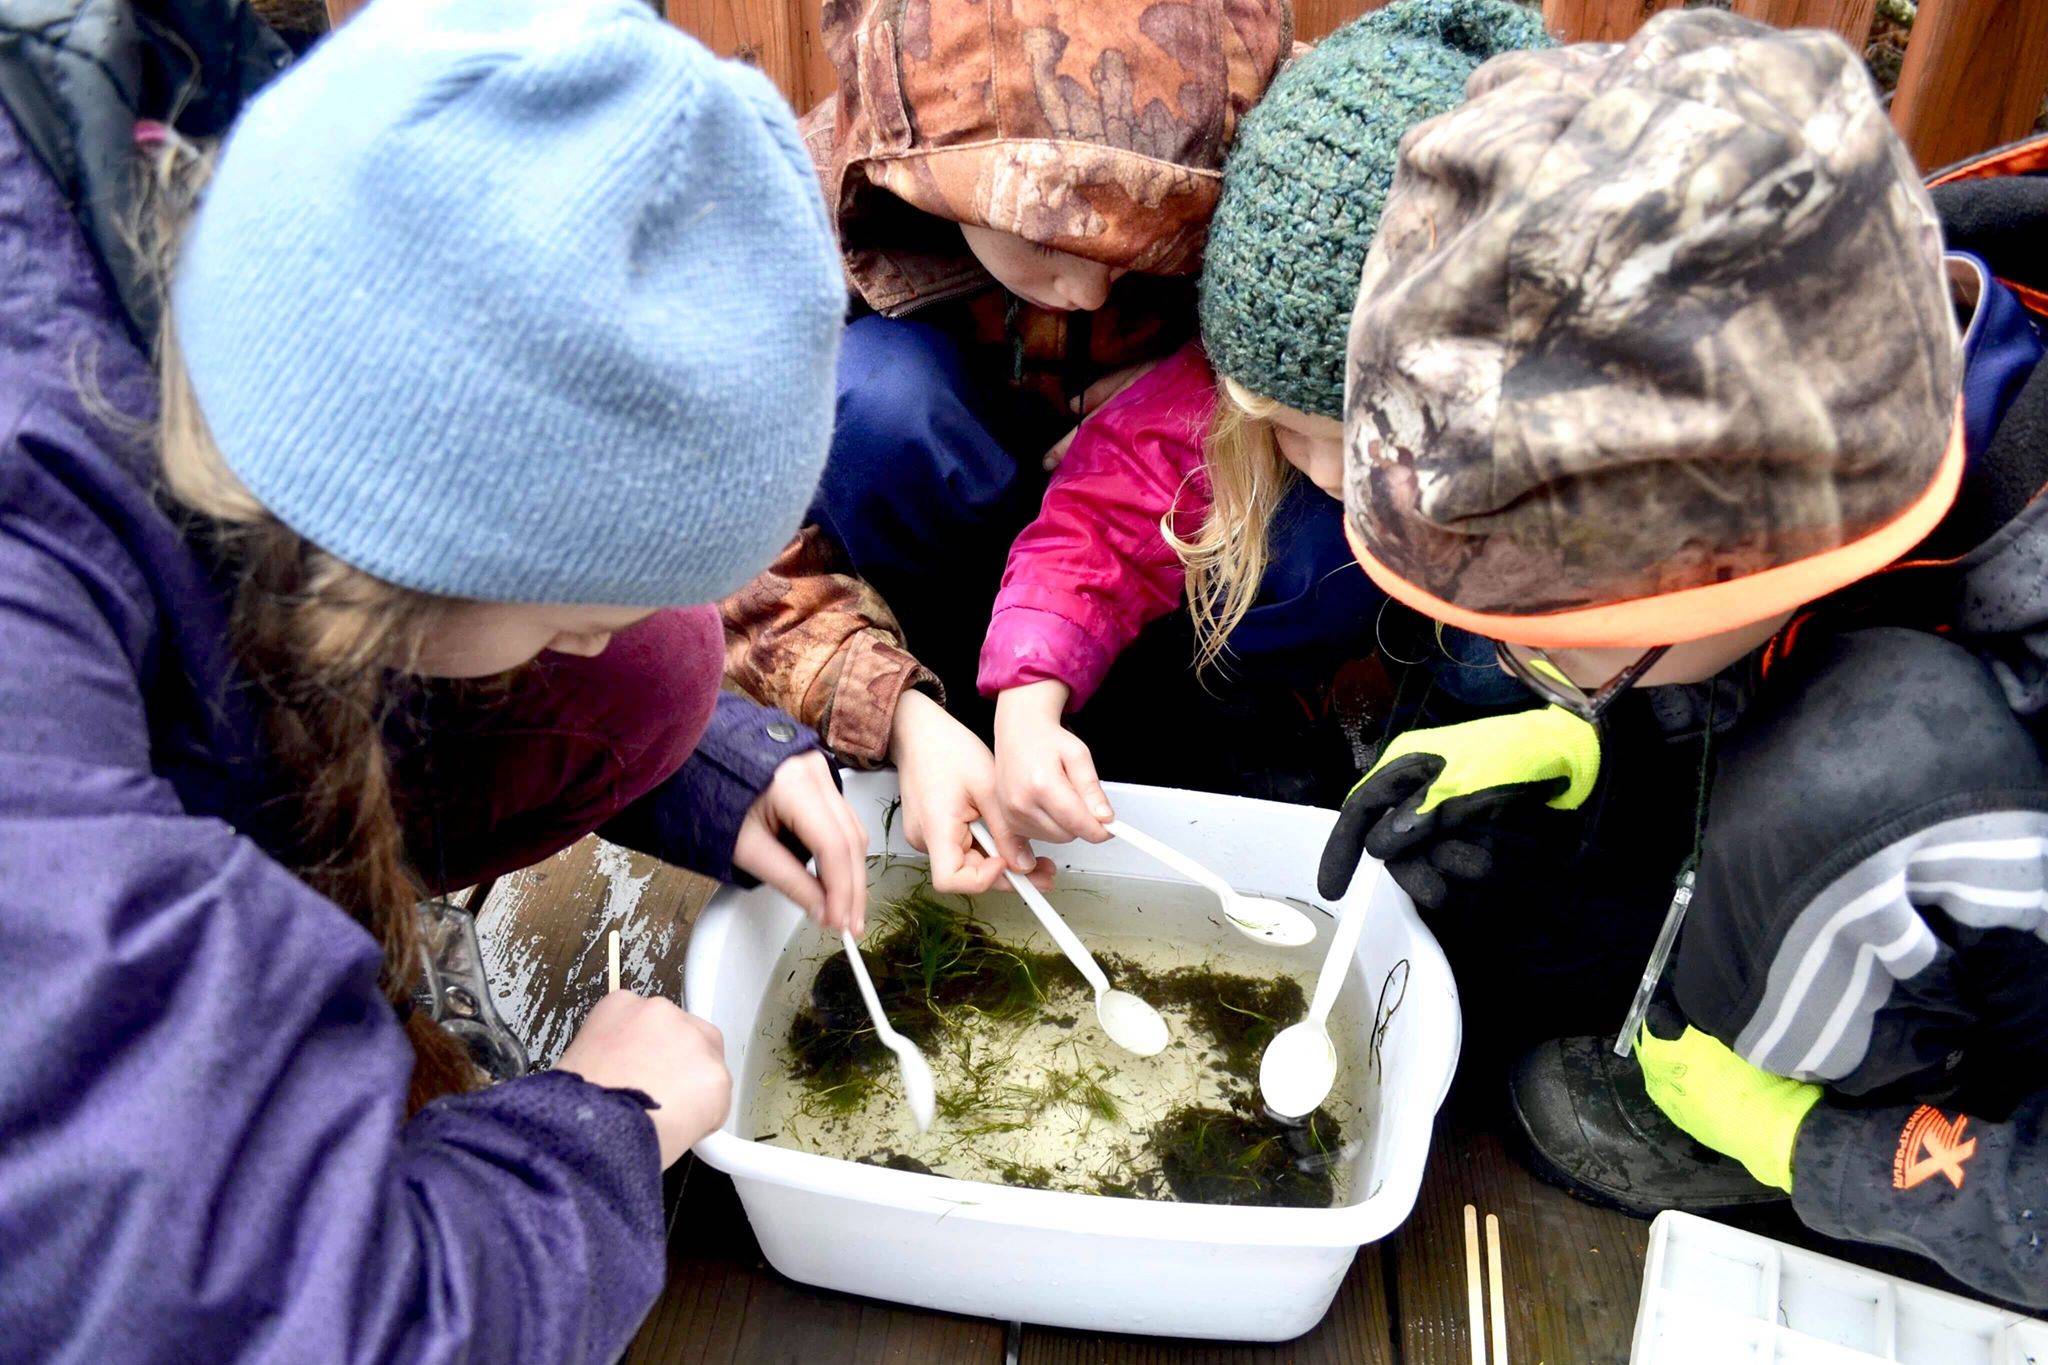 Students from Connections Homeschool look for bugs to classify and identify in a sample from Soldotna Creek, as part of the Kenai Watershed Forum’s Adopt-A-Stream program, on Thursday, Nov. 7, 2019, in Soldotna, Alaska. (Photo by Victoria Petersen/Peninsula Clarion)